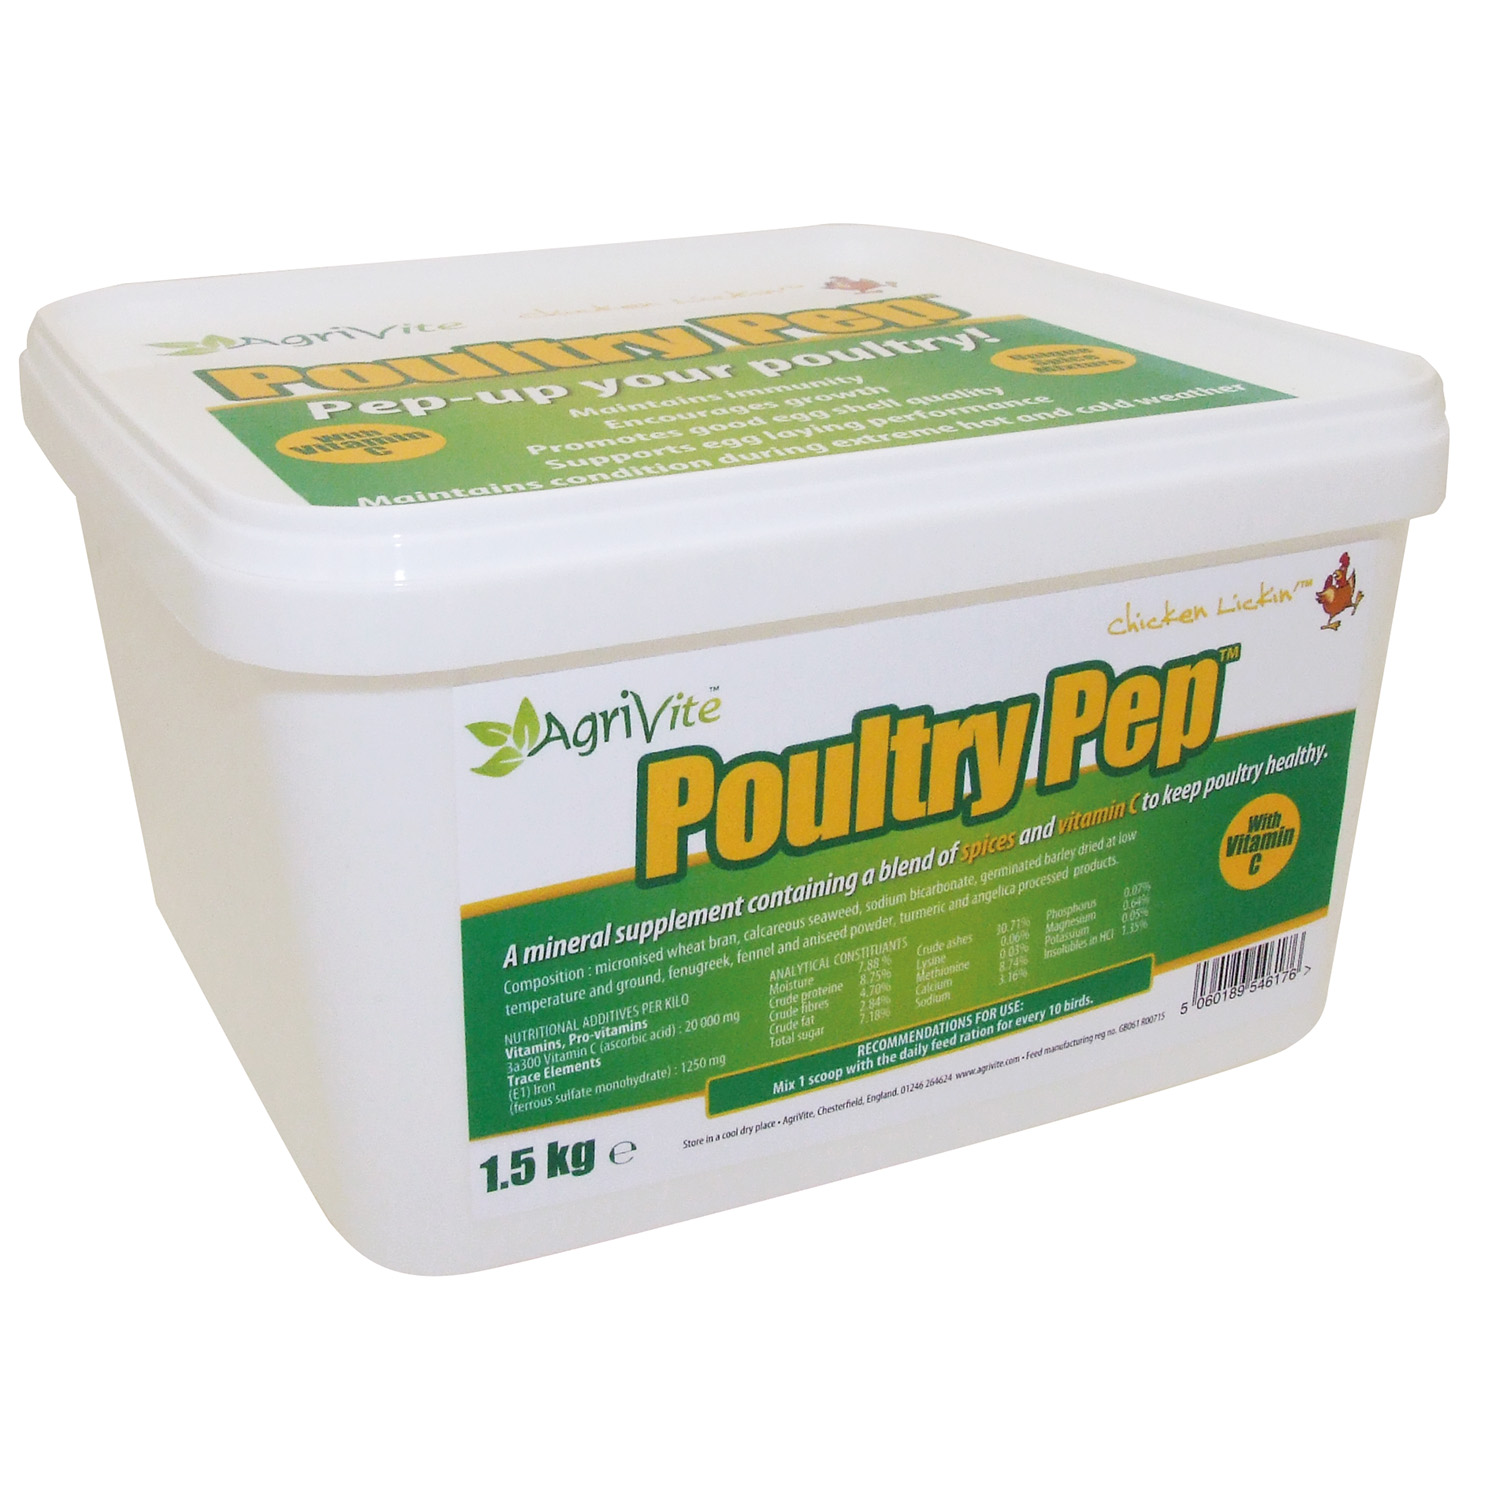 AGRIVITE POULTRY PEP 1.5 KG